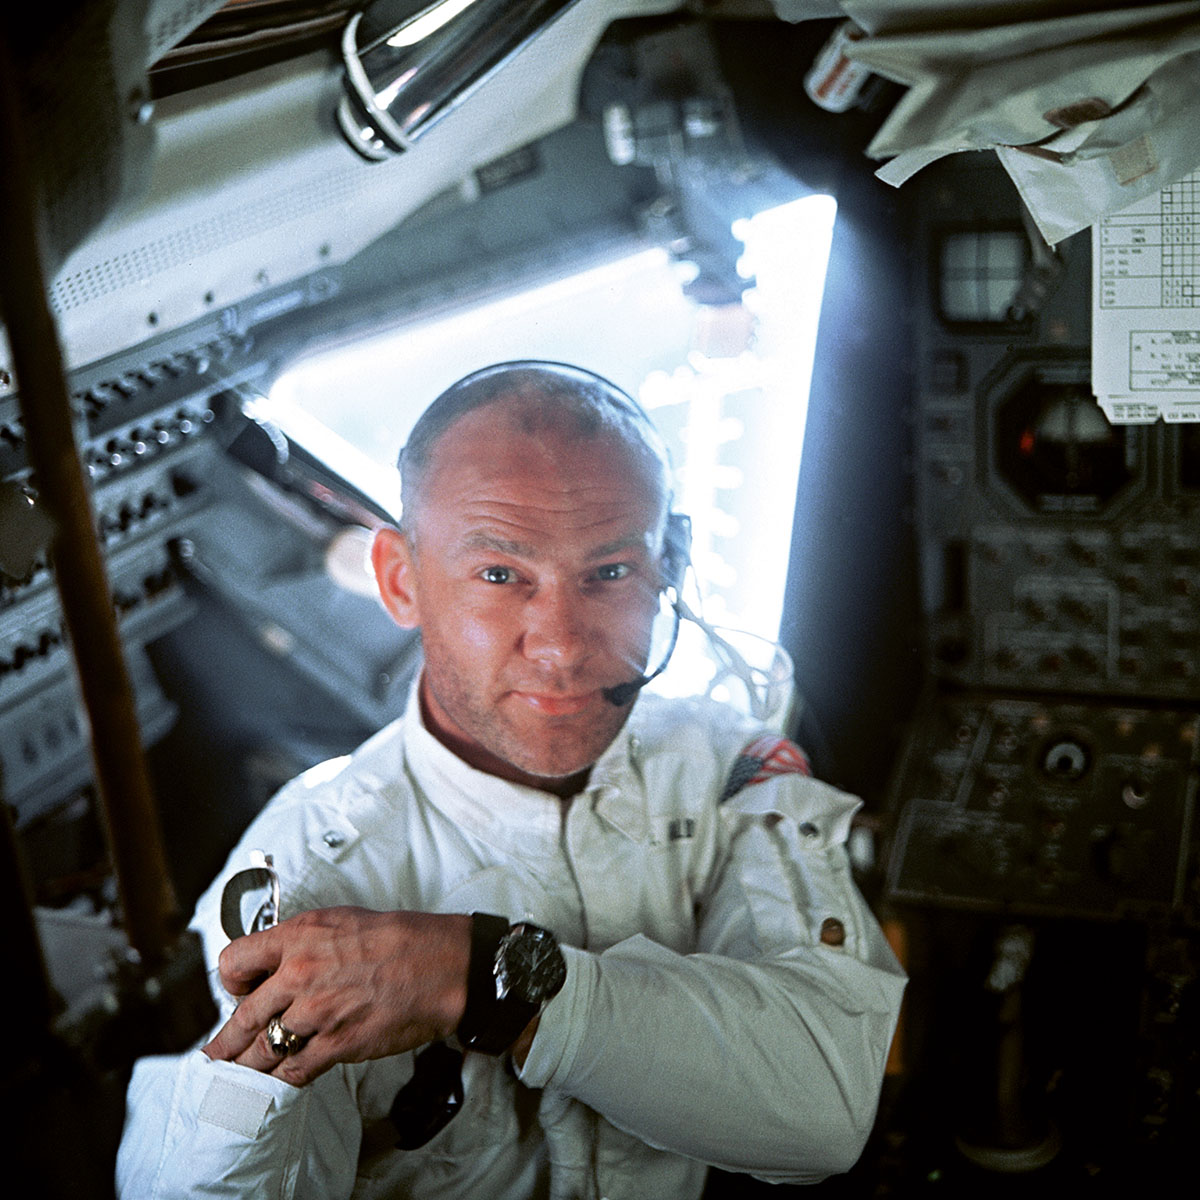 Buzz Aldrin in the cockpit of the Lunar Module, wearing his OMEGA Speedmaster